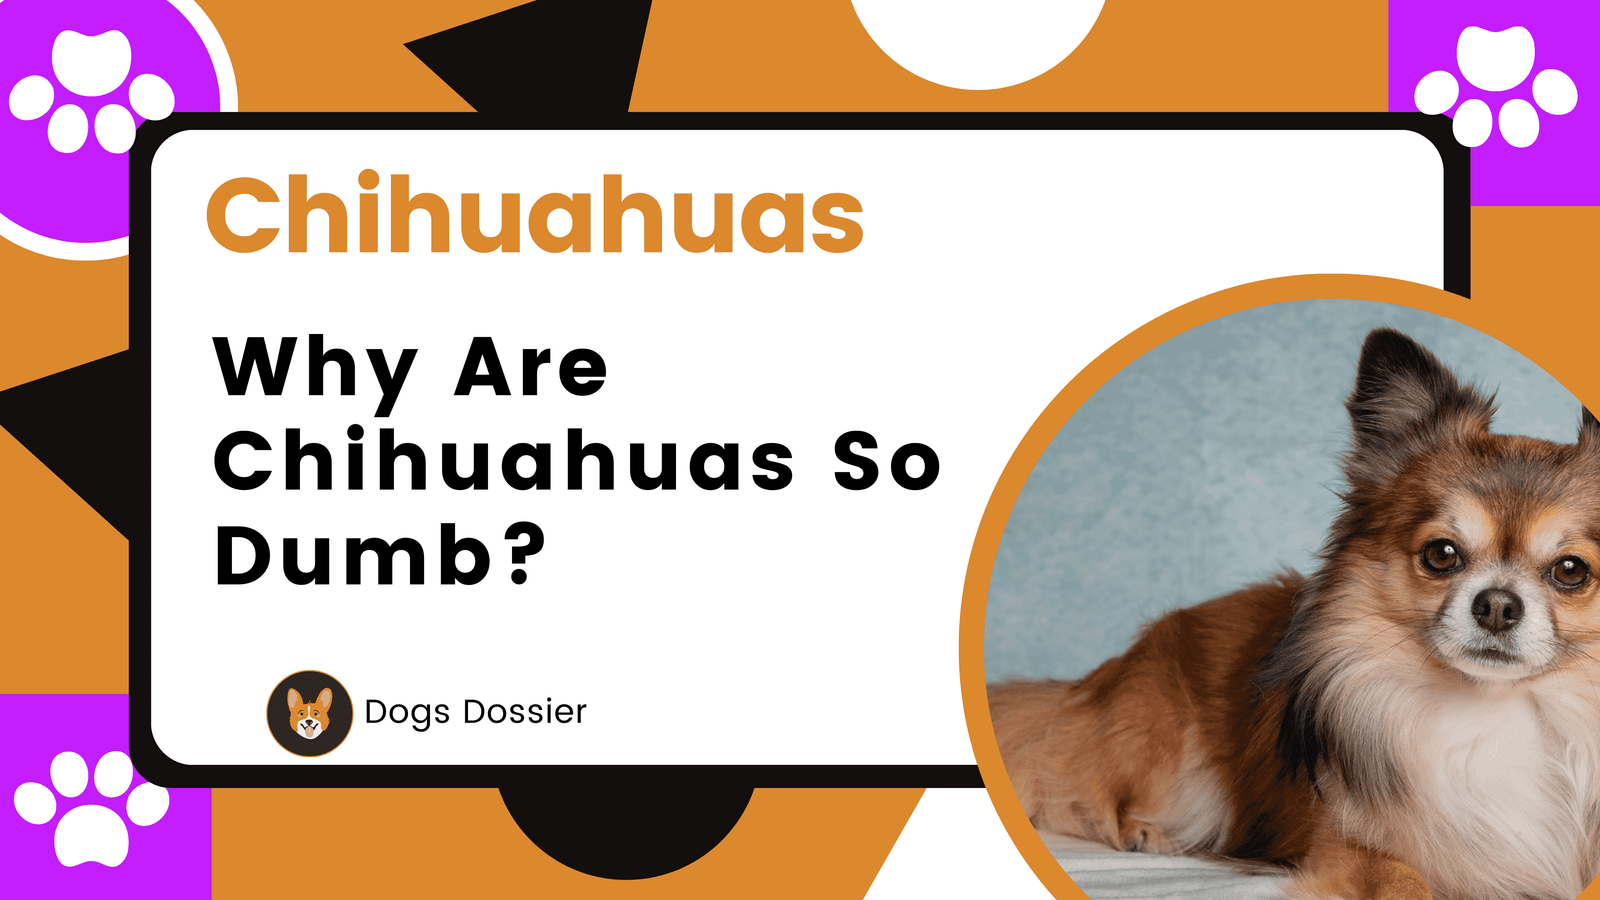 Why Are Chihuahuas So Dumb?